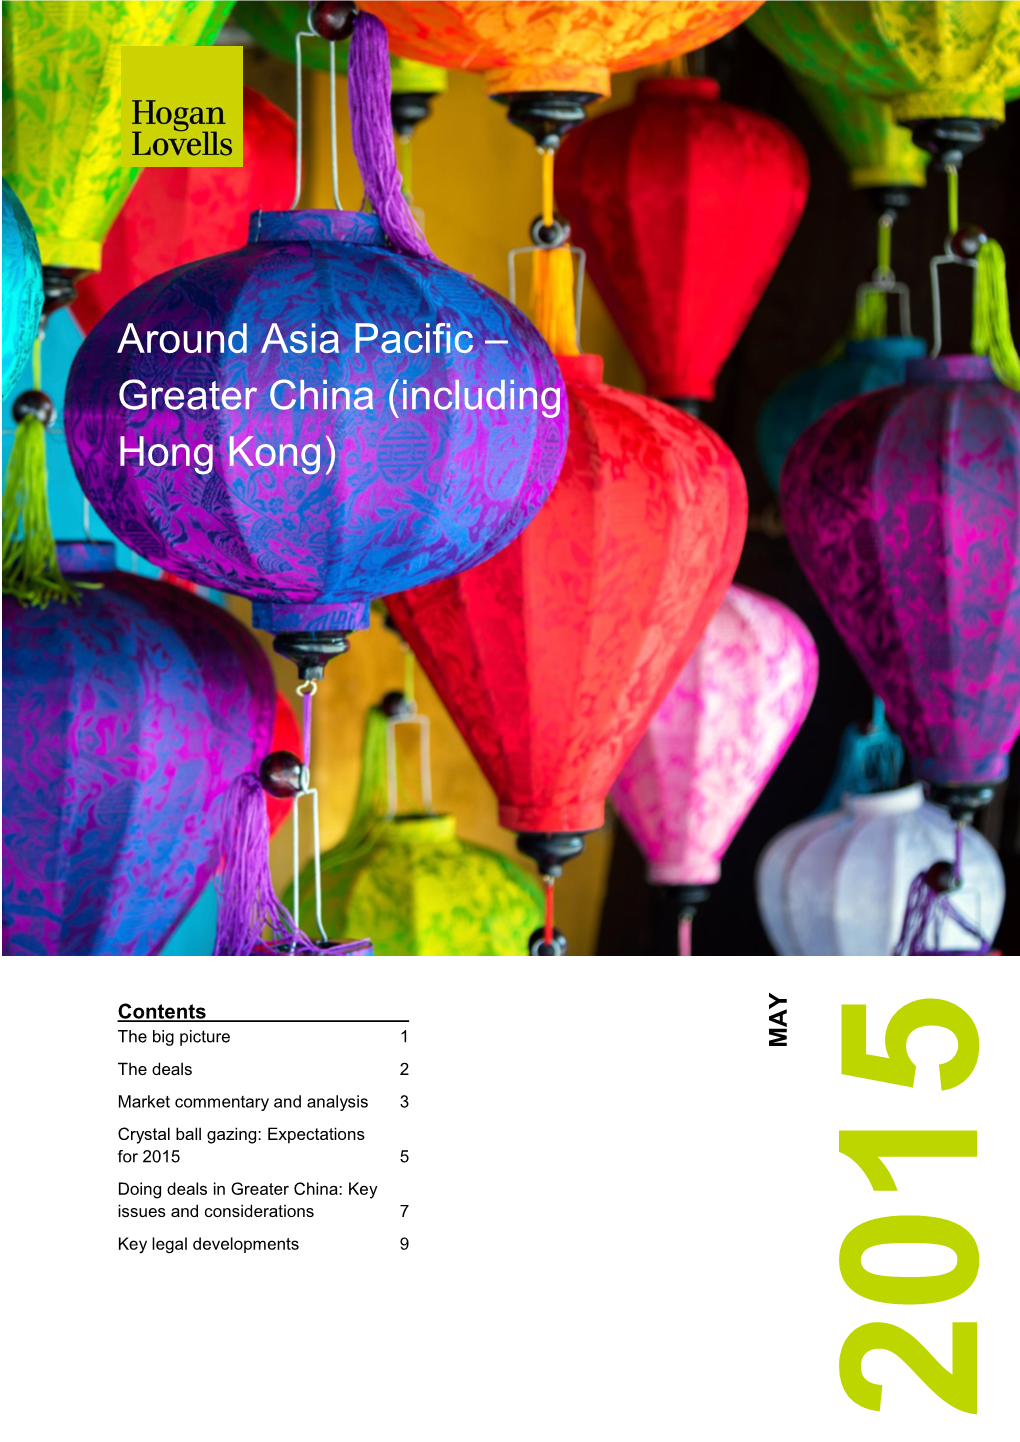 Around Asia Pacific – Greater China (Including Hong Kong)